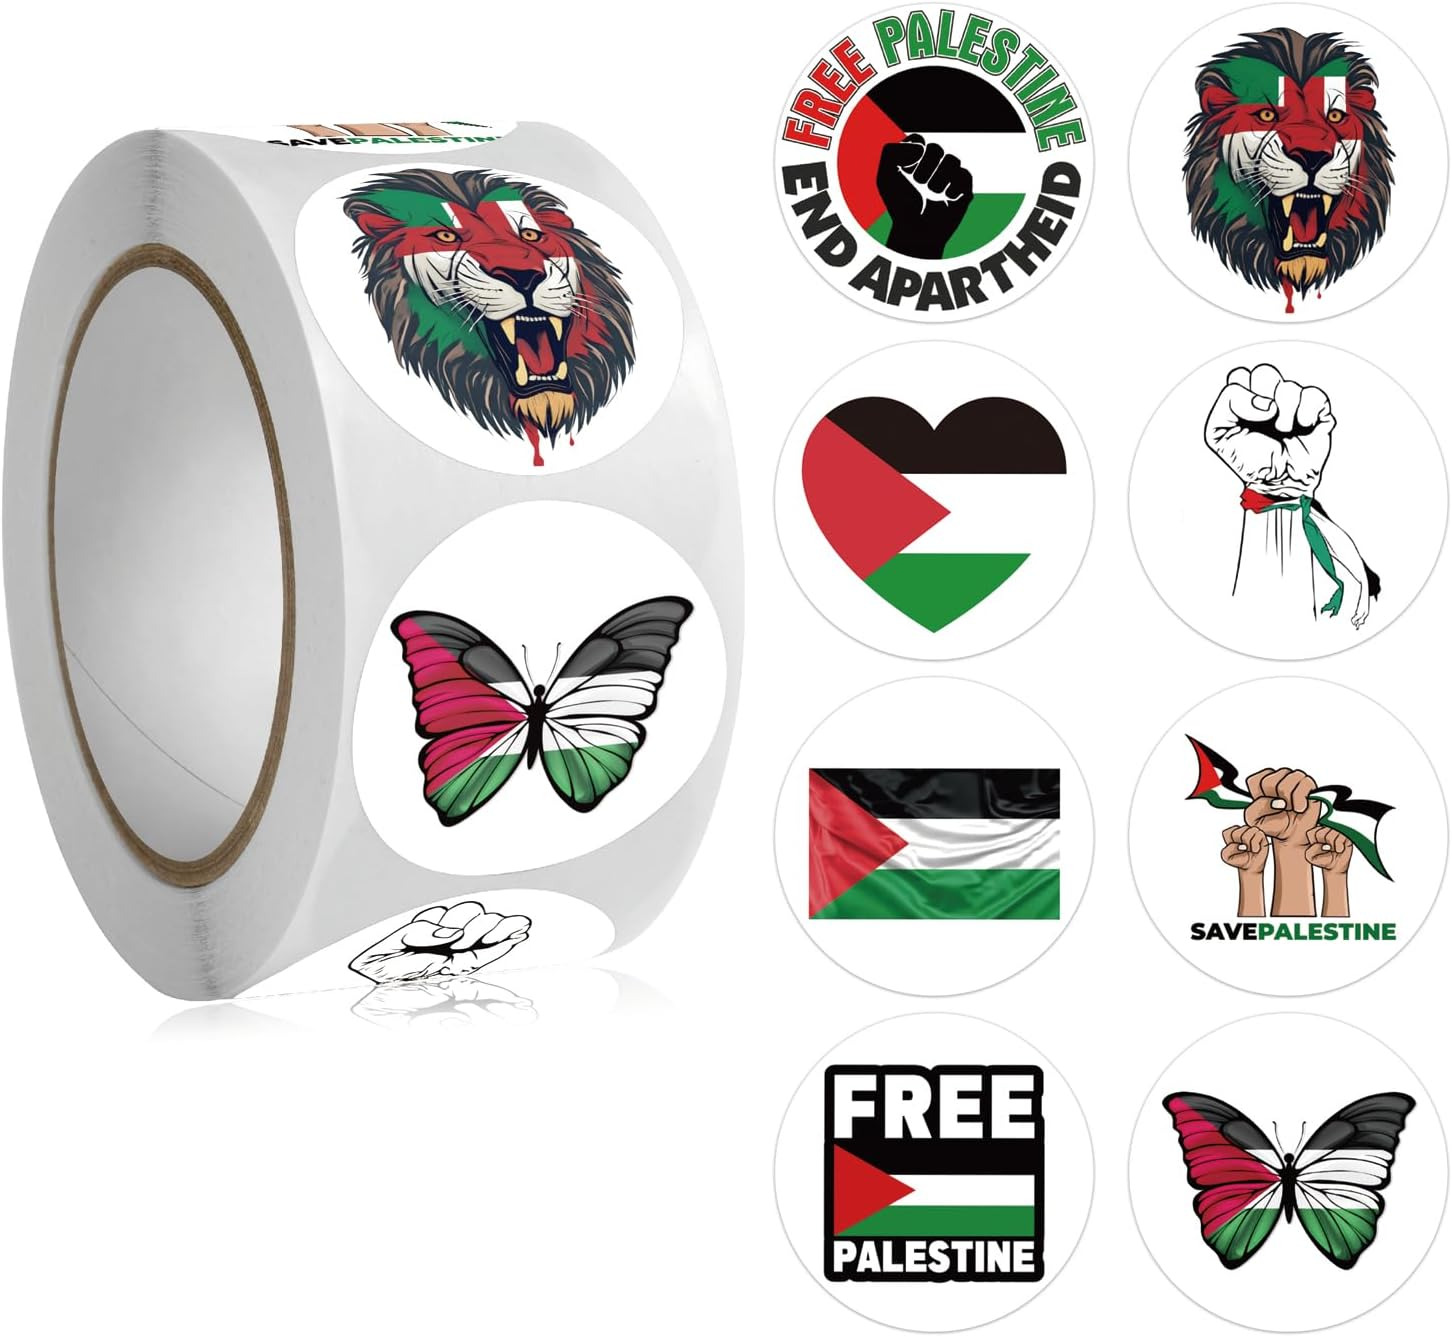 500Pcs Free Palestine Stickers Roll - 8 Freedom Stand with Palestine Flags Decal